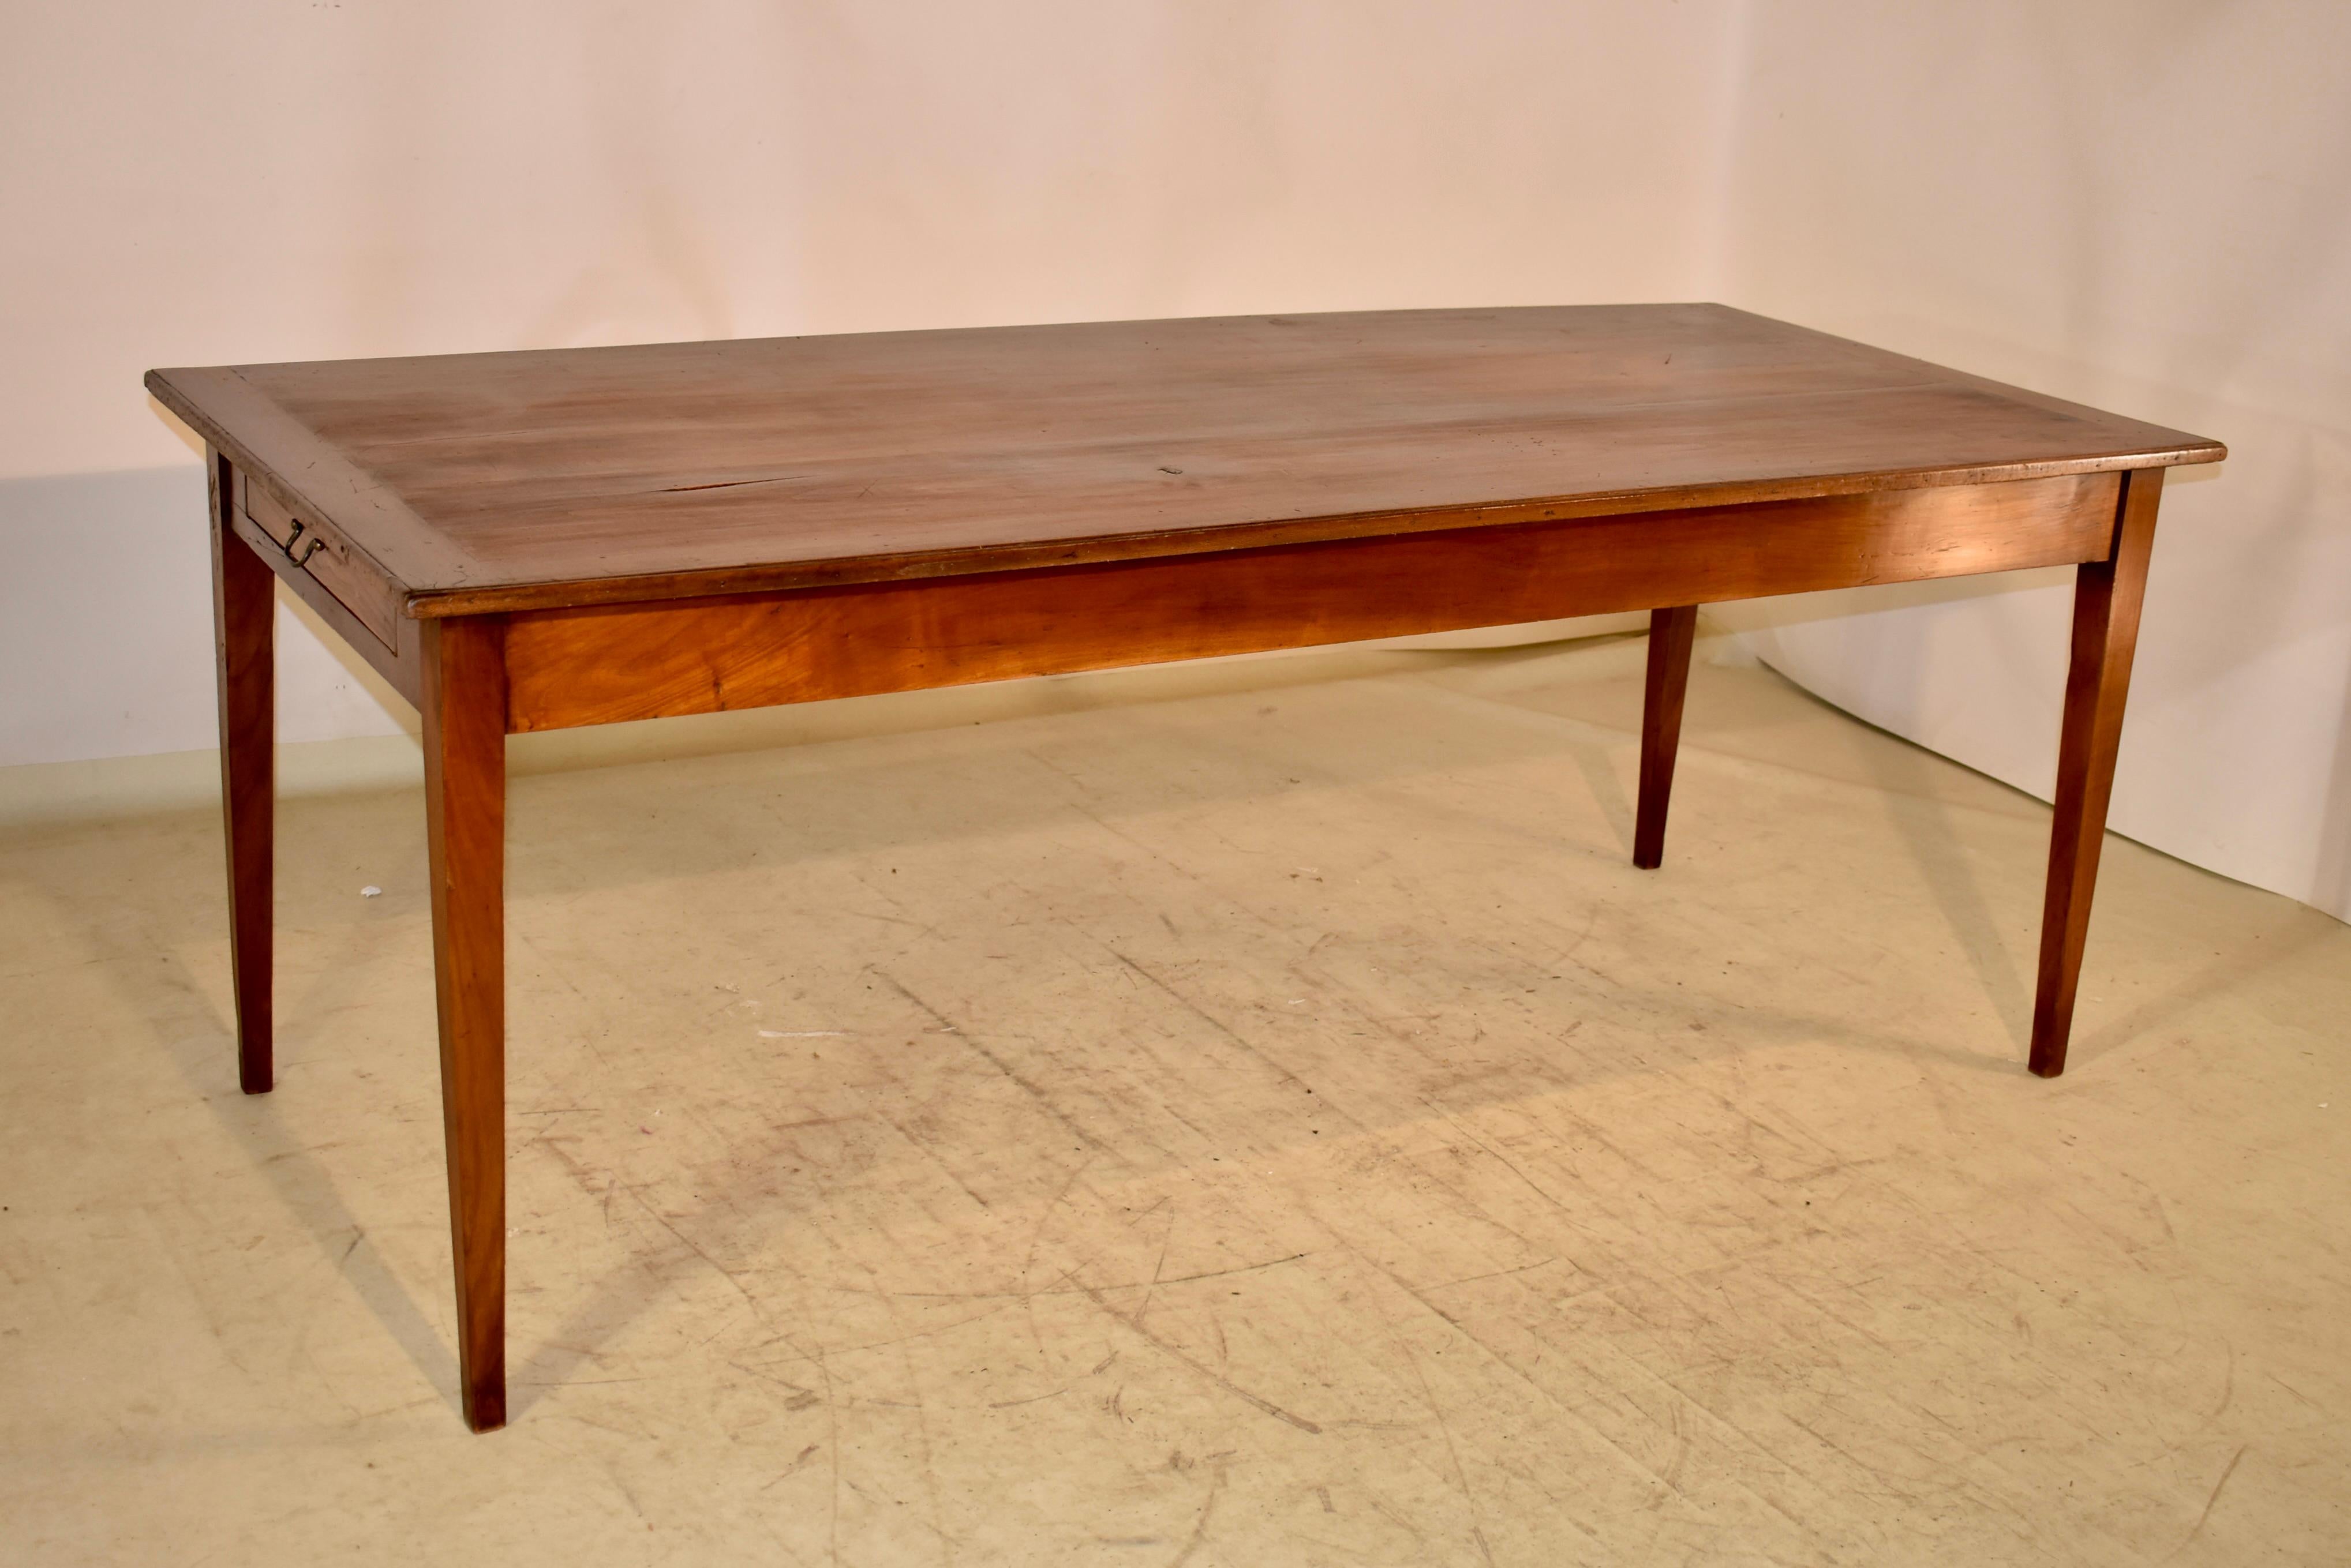 French 19th Century Chestnut Farm Table from France For Sale